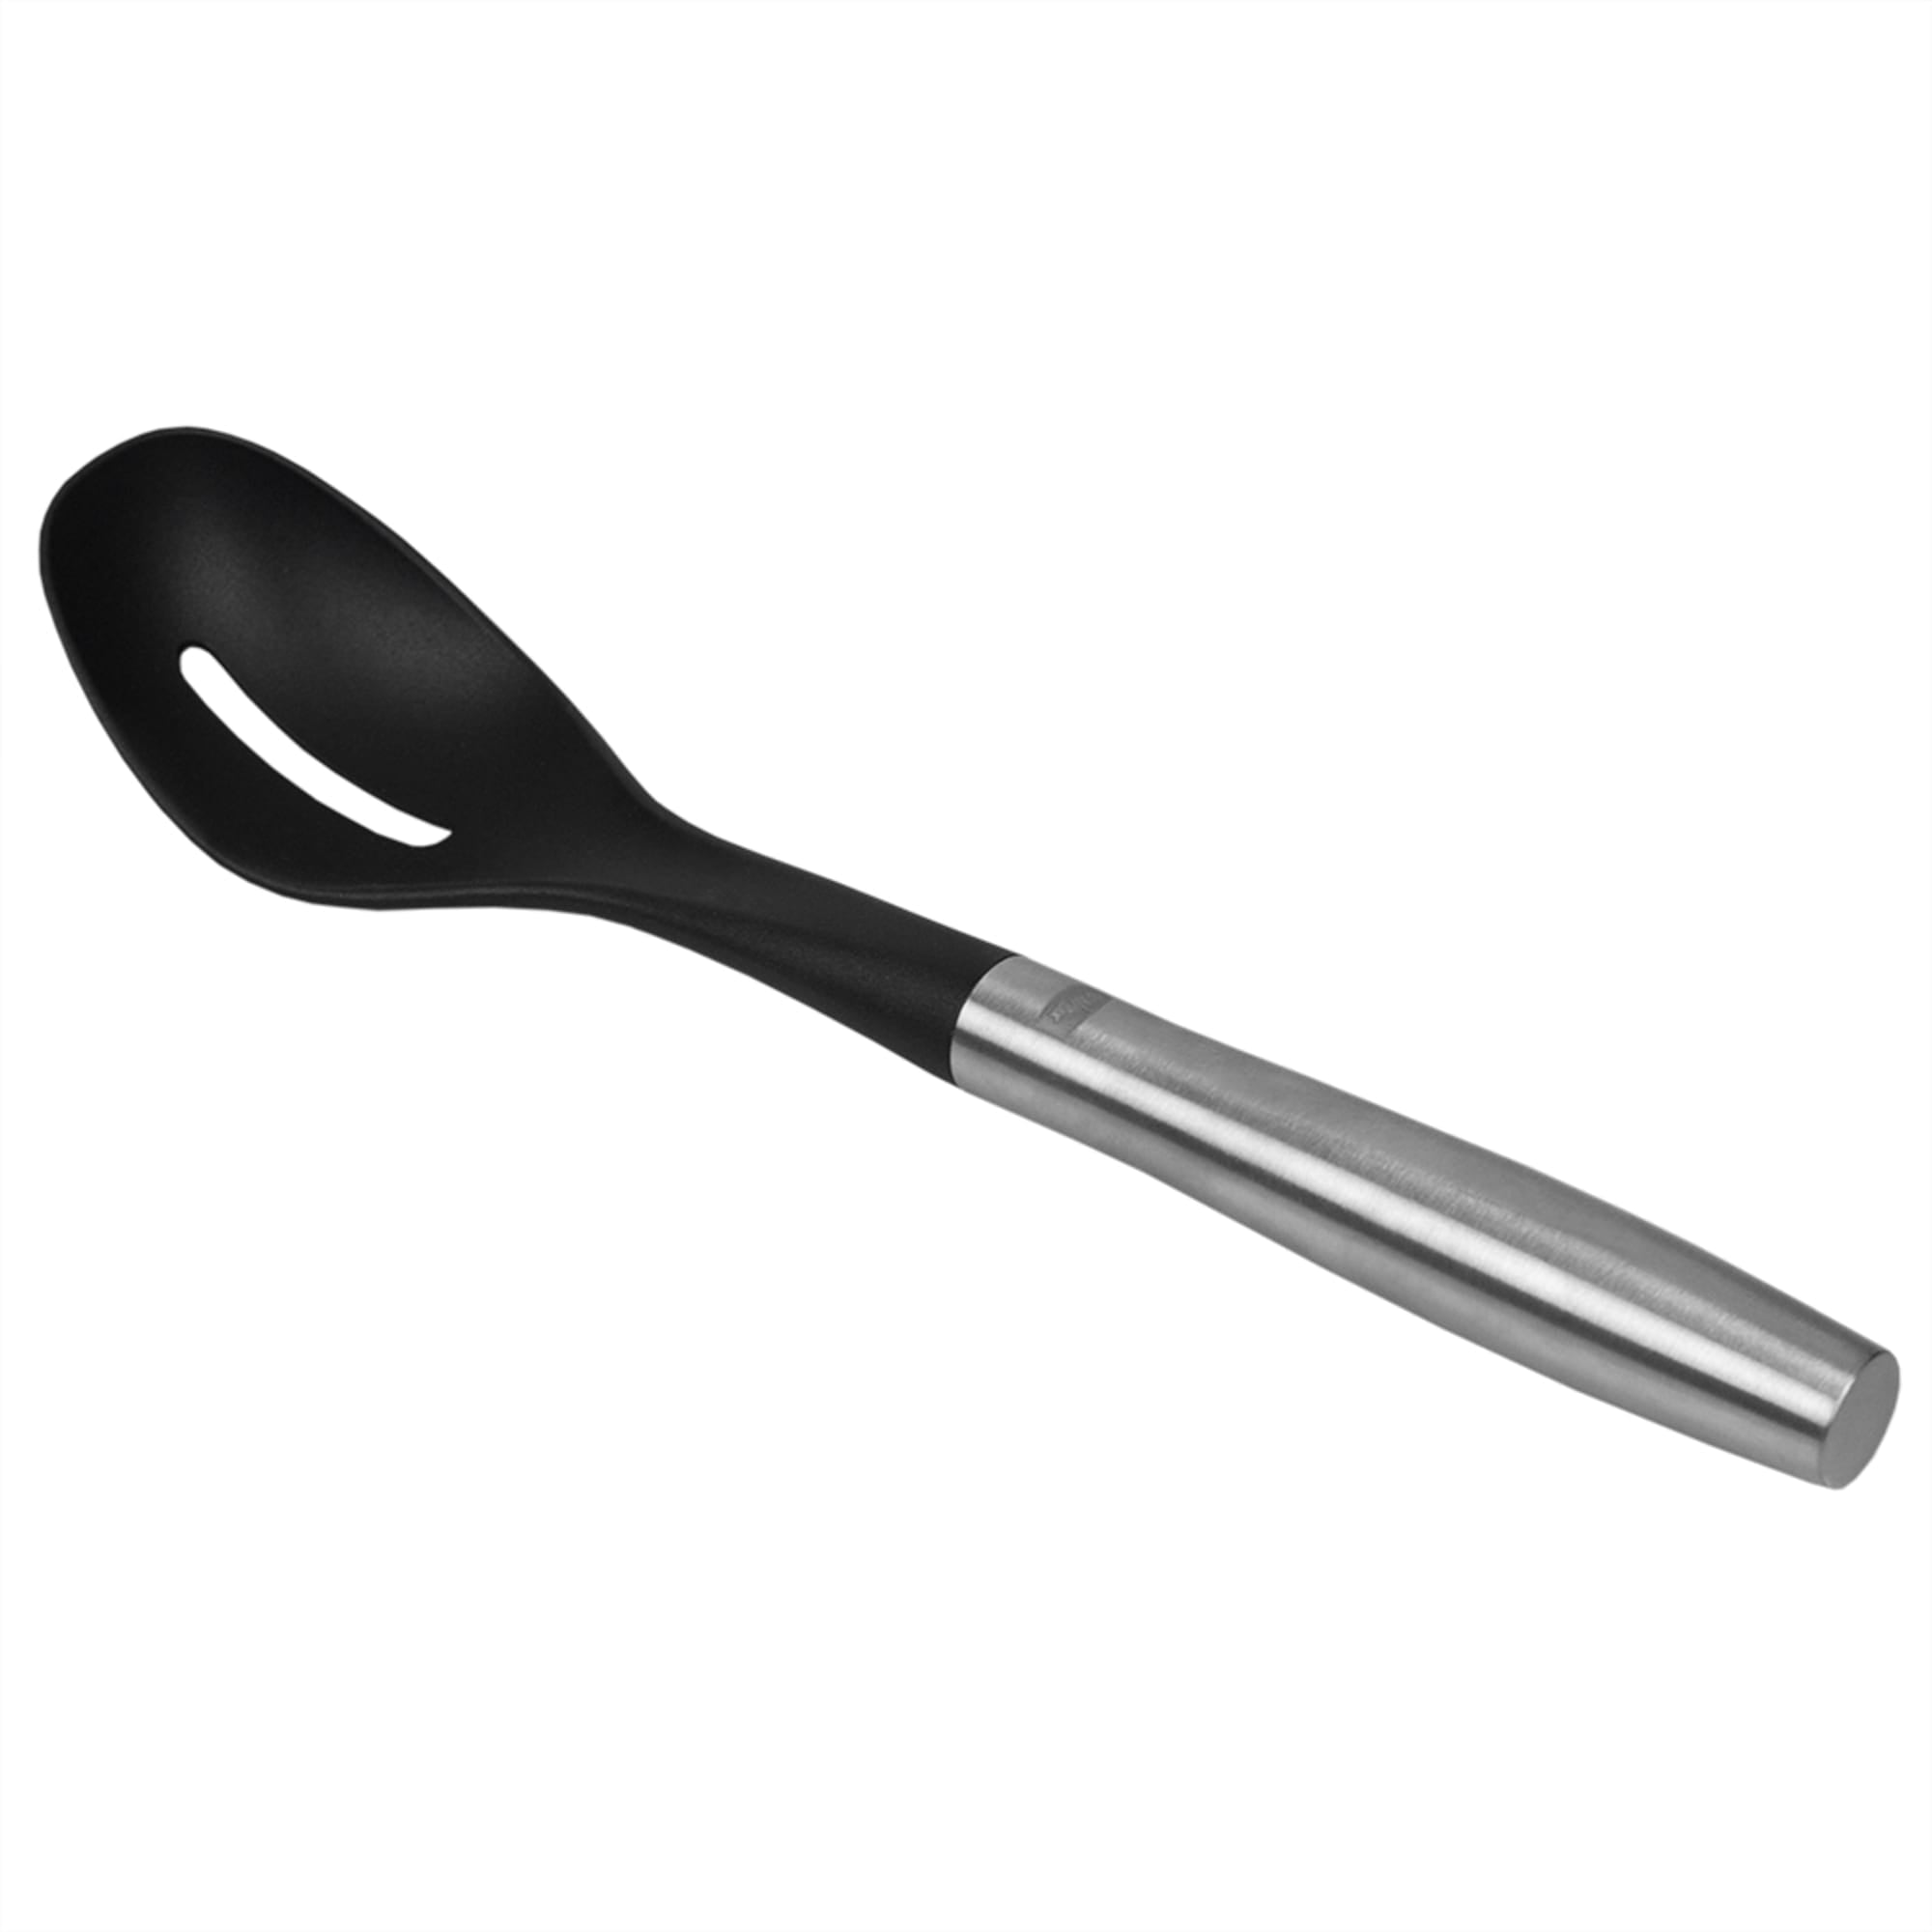 Home Basics Mesa Collection Scratch-Resistant Nylon Slotted Spoon, Black $3.00 EACH, CASE PACK OF 24